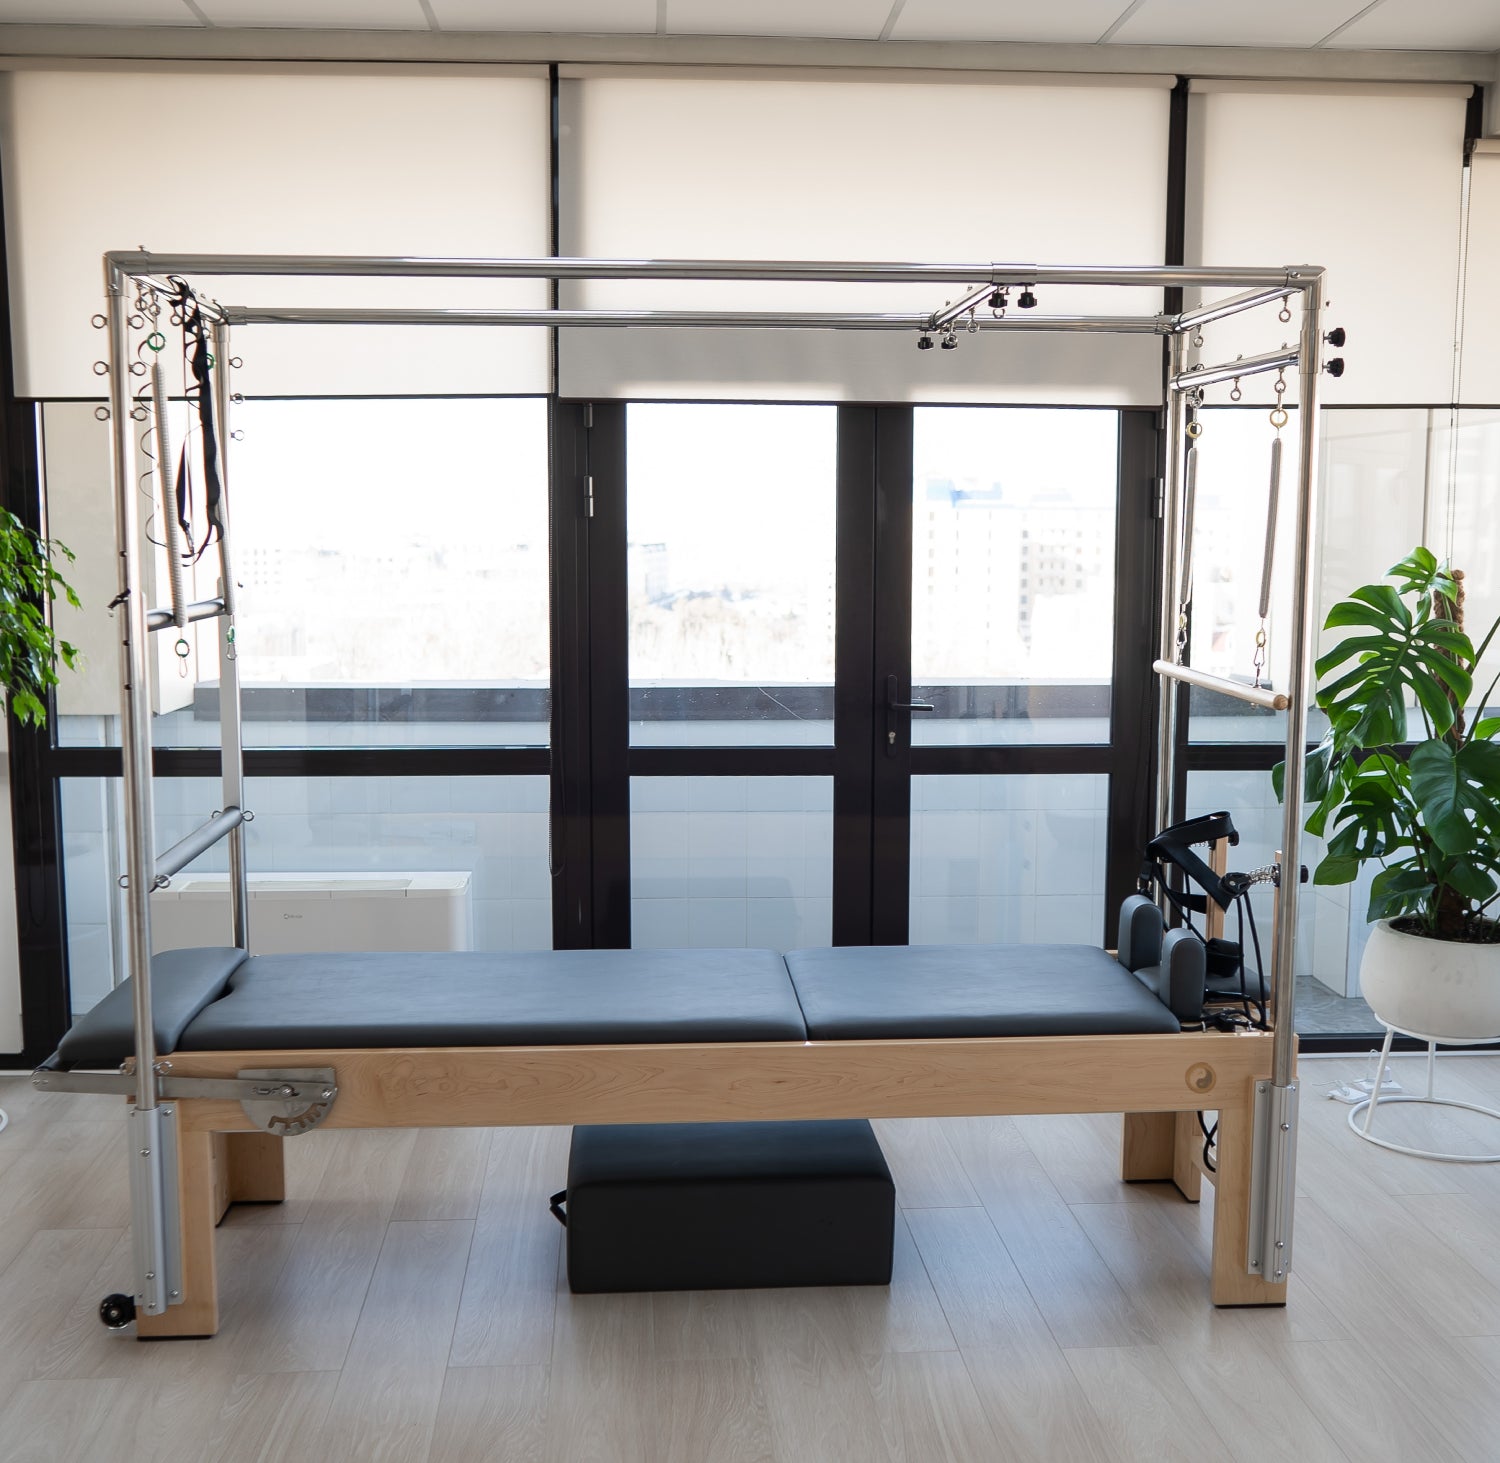  Napolie Pilates Bed Pilates Reformer - Full Trapeze